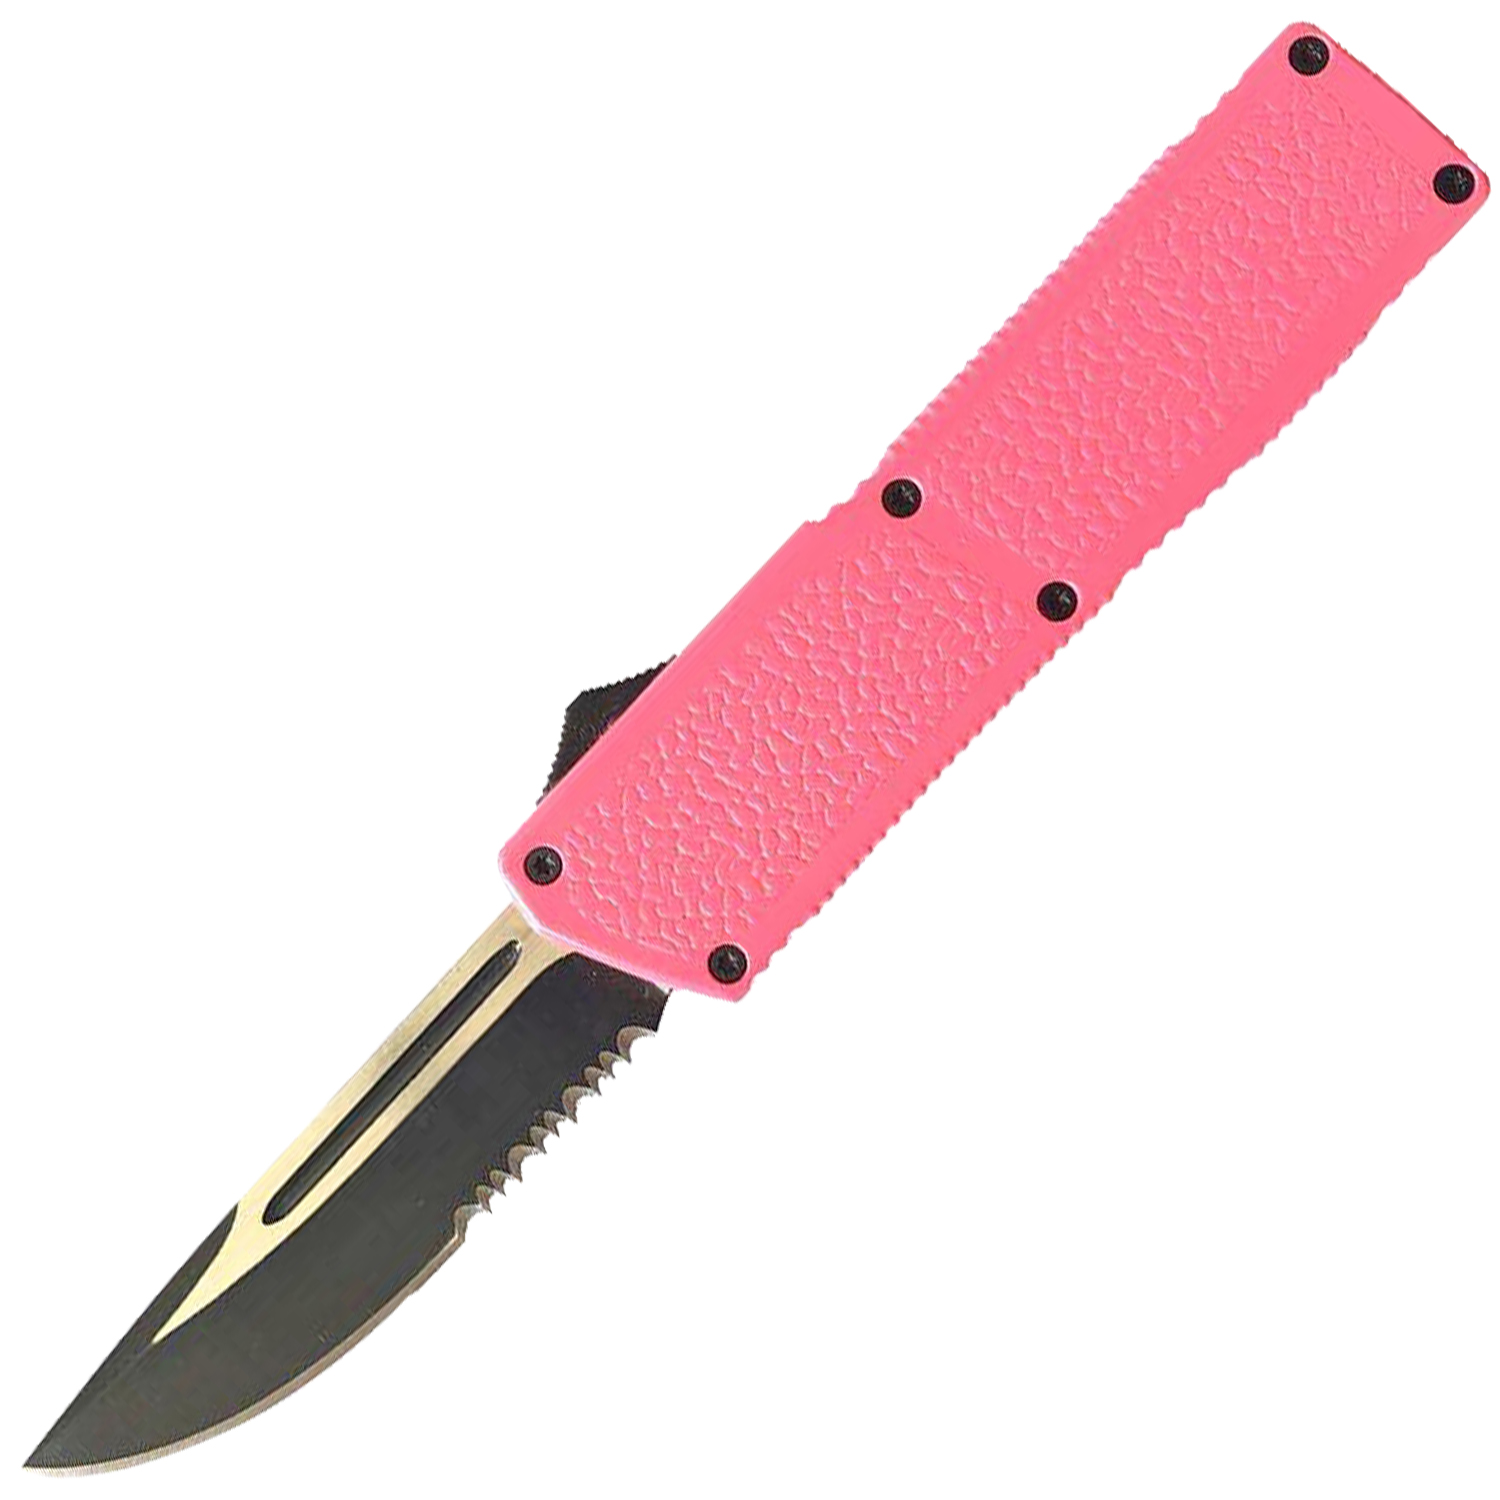 Lighting Action Assisted Knife Two Toned Pink Killer